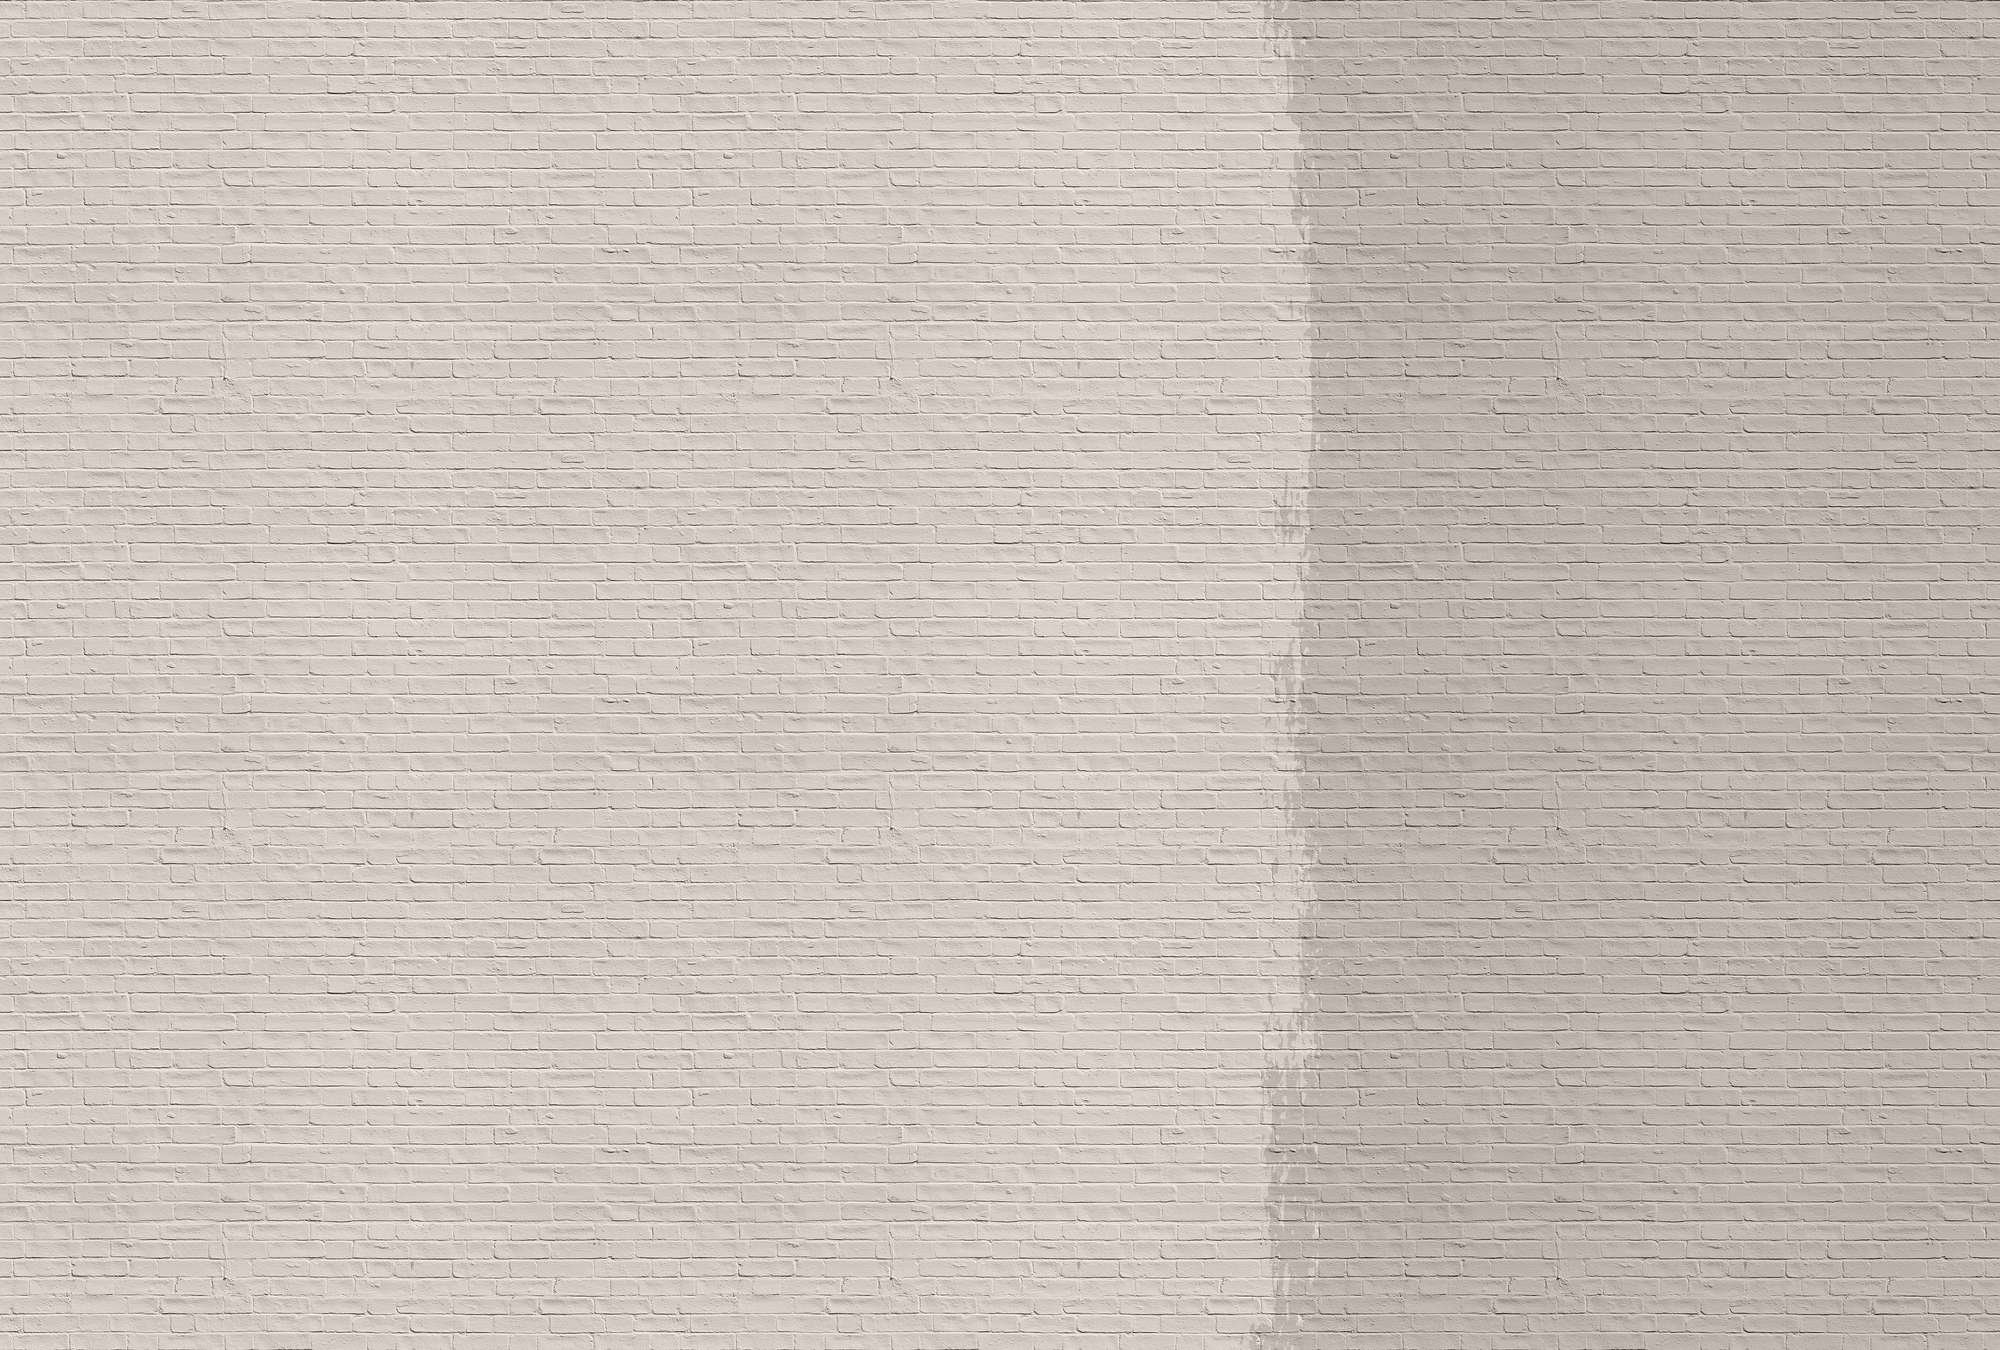             Tainted love 1 - Brick Wallpaper painted - Beige, Taupe | Textured Non-woven
        